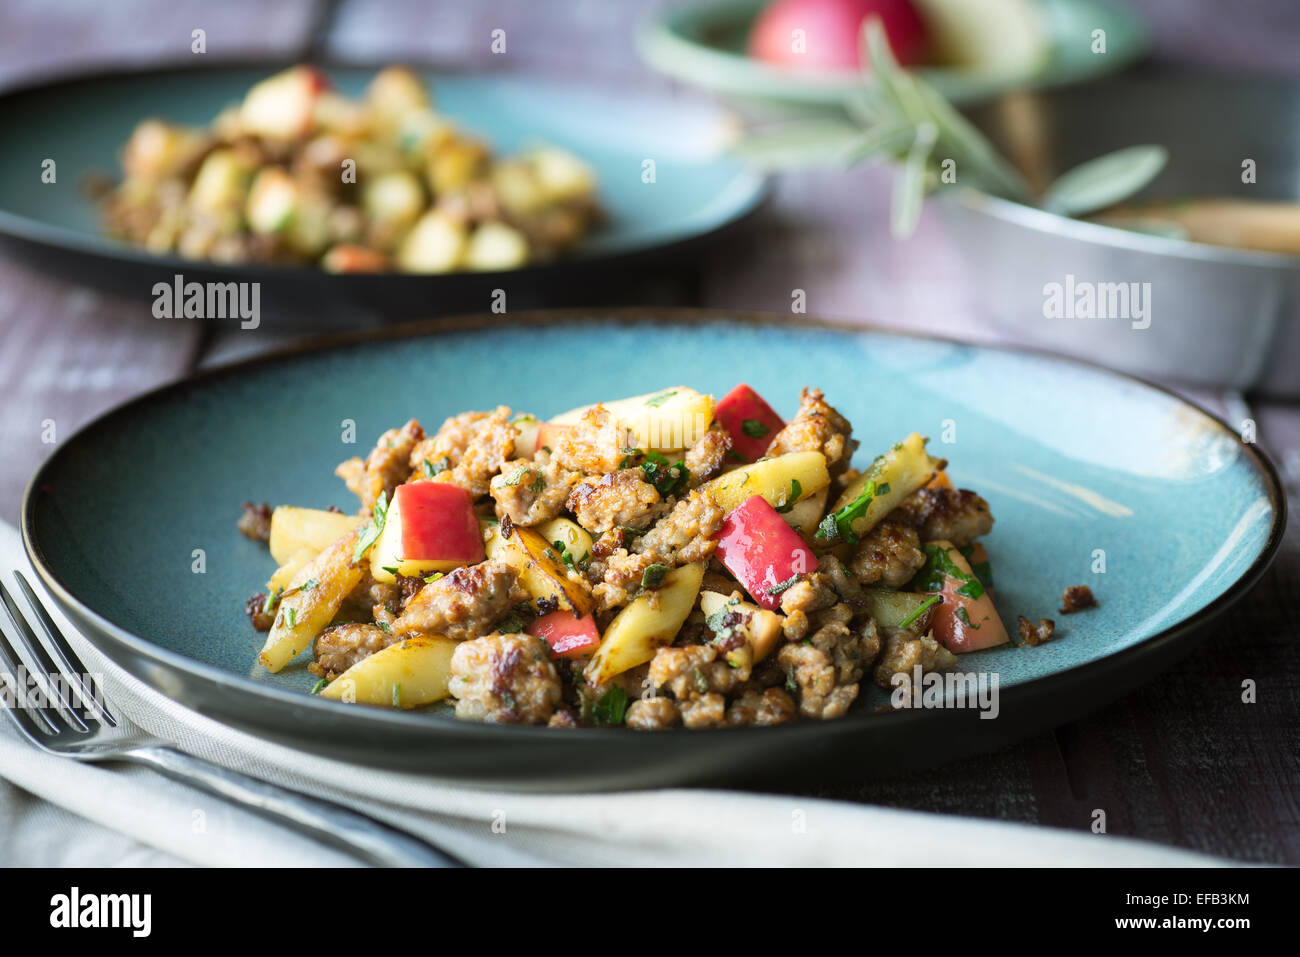 Spicy pork parsnip and apple dish with sage and parsley Stock Photo